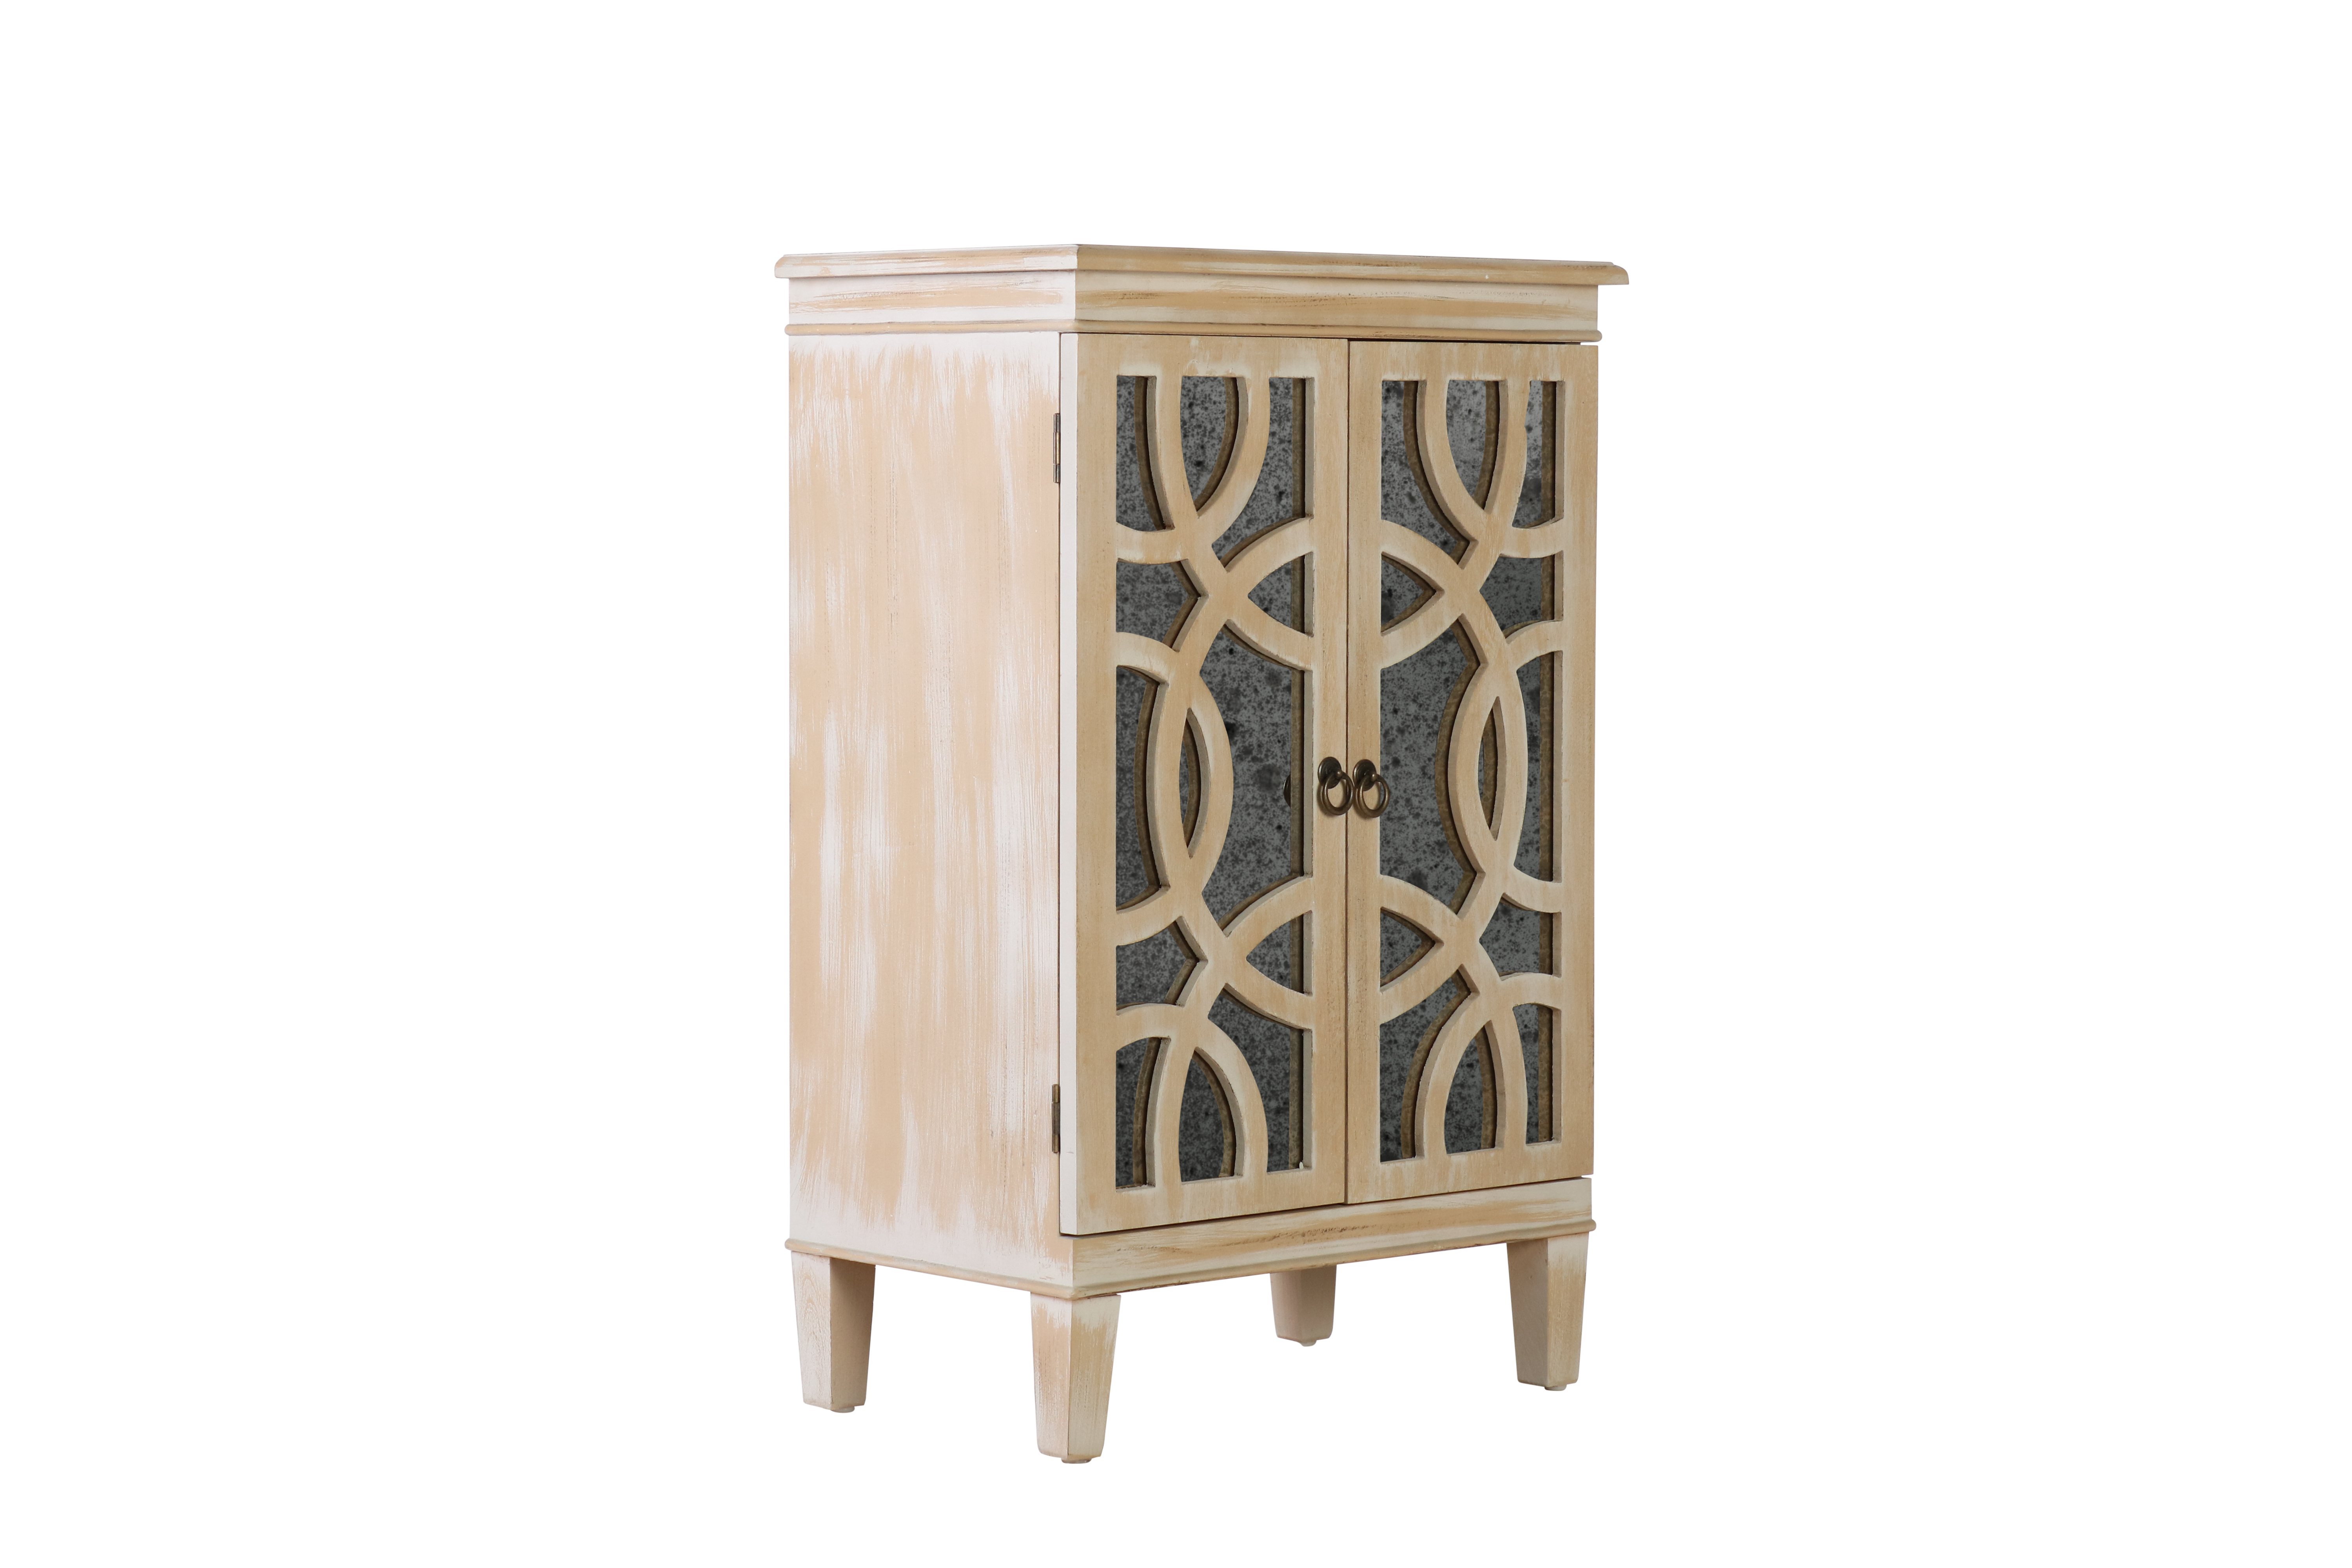 Block & Chisel wooden bedside table with antique mirror detail Château Collection